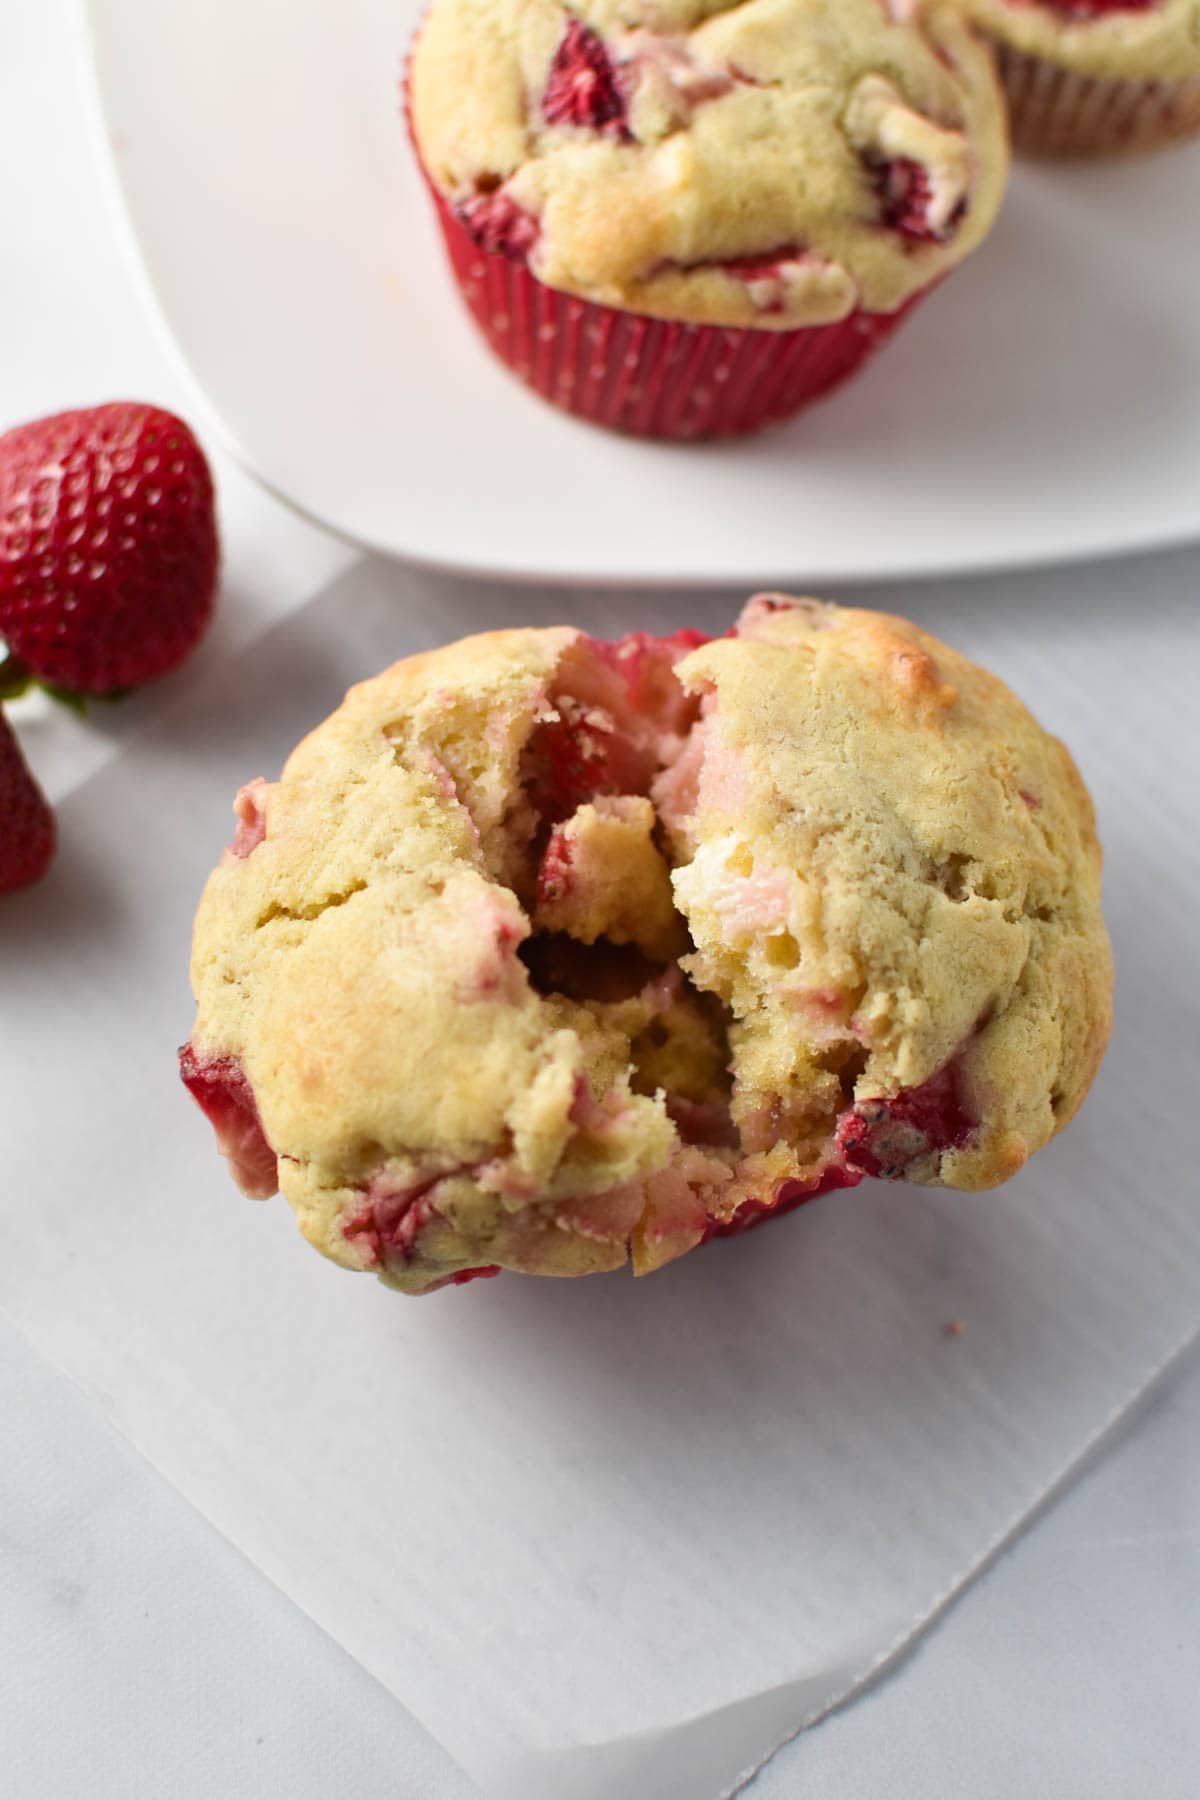 A strawberry cream cheese muffin being pulled open to show the inside.